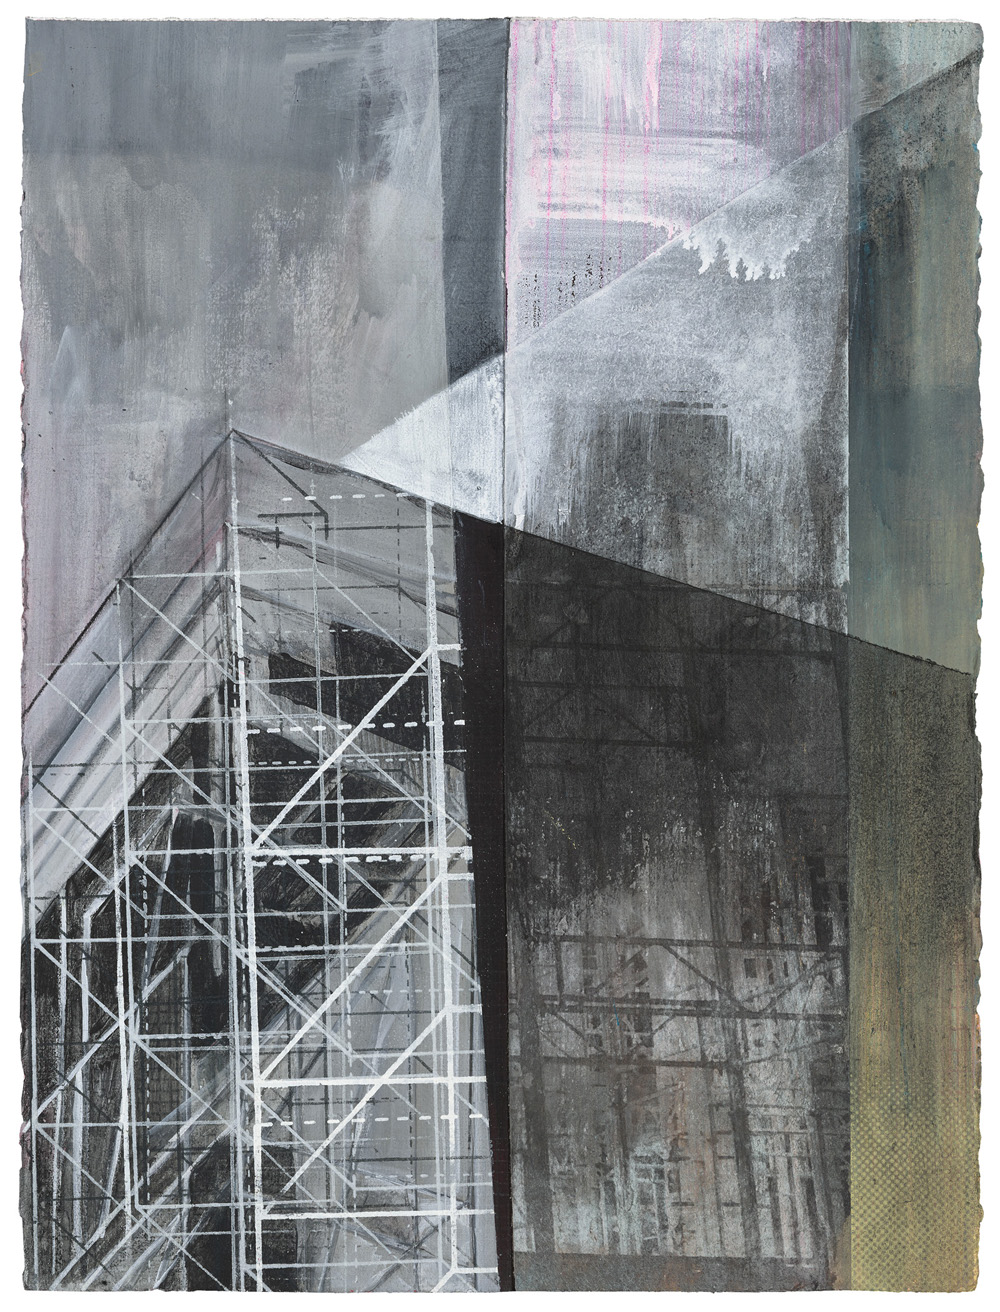 Amanda Knowles, In Construction, 2021, screenprint, acrylic, and graphite on paper, 18 x 13 inches, $1200.